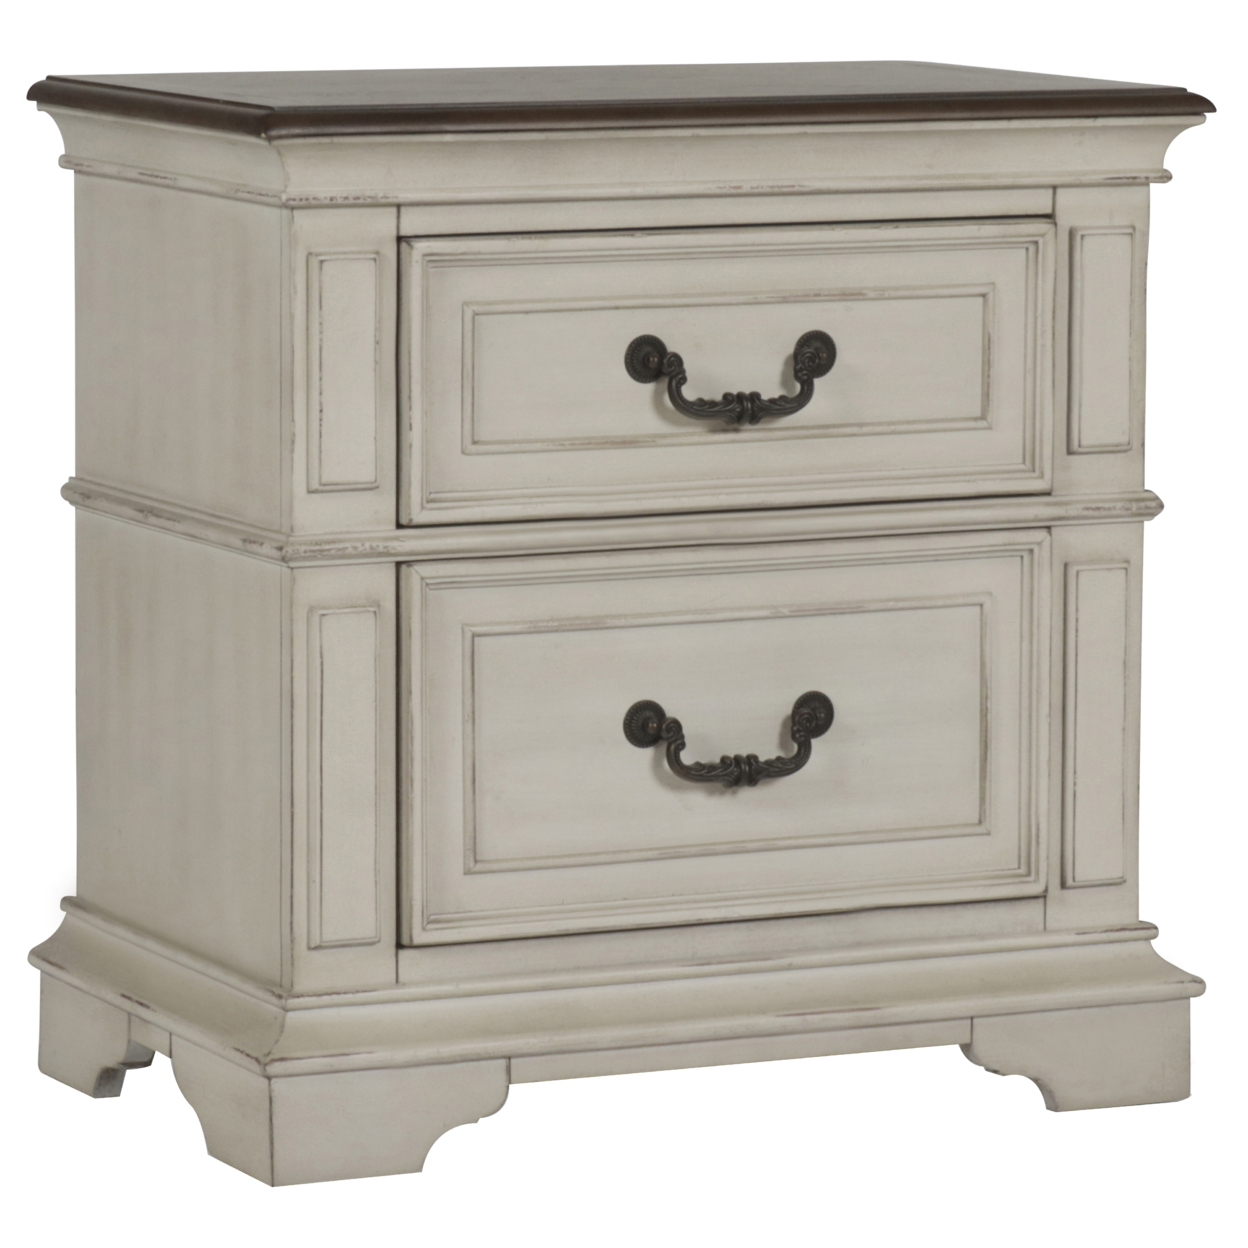 Two Drawer Wooden Nightstand With Bracket Legs, White And Brown- Saltoro Sherpi